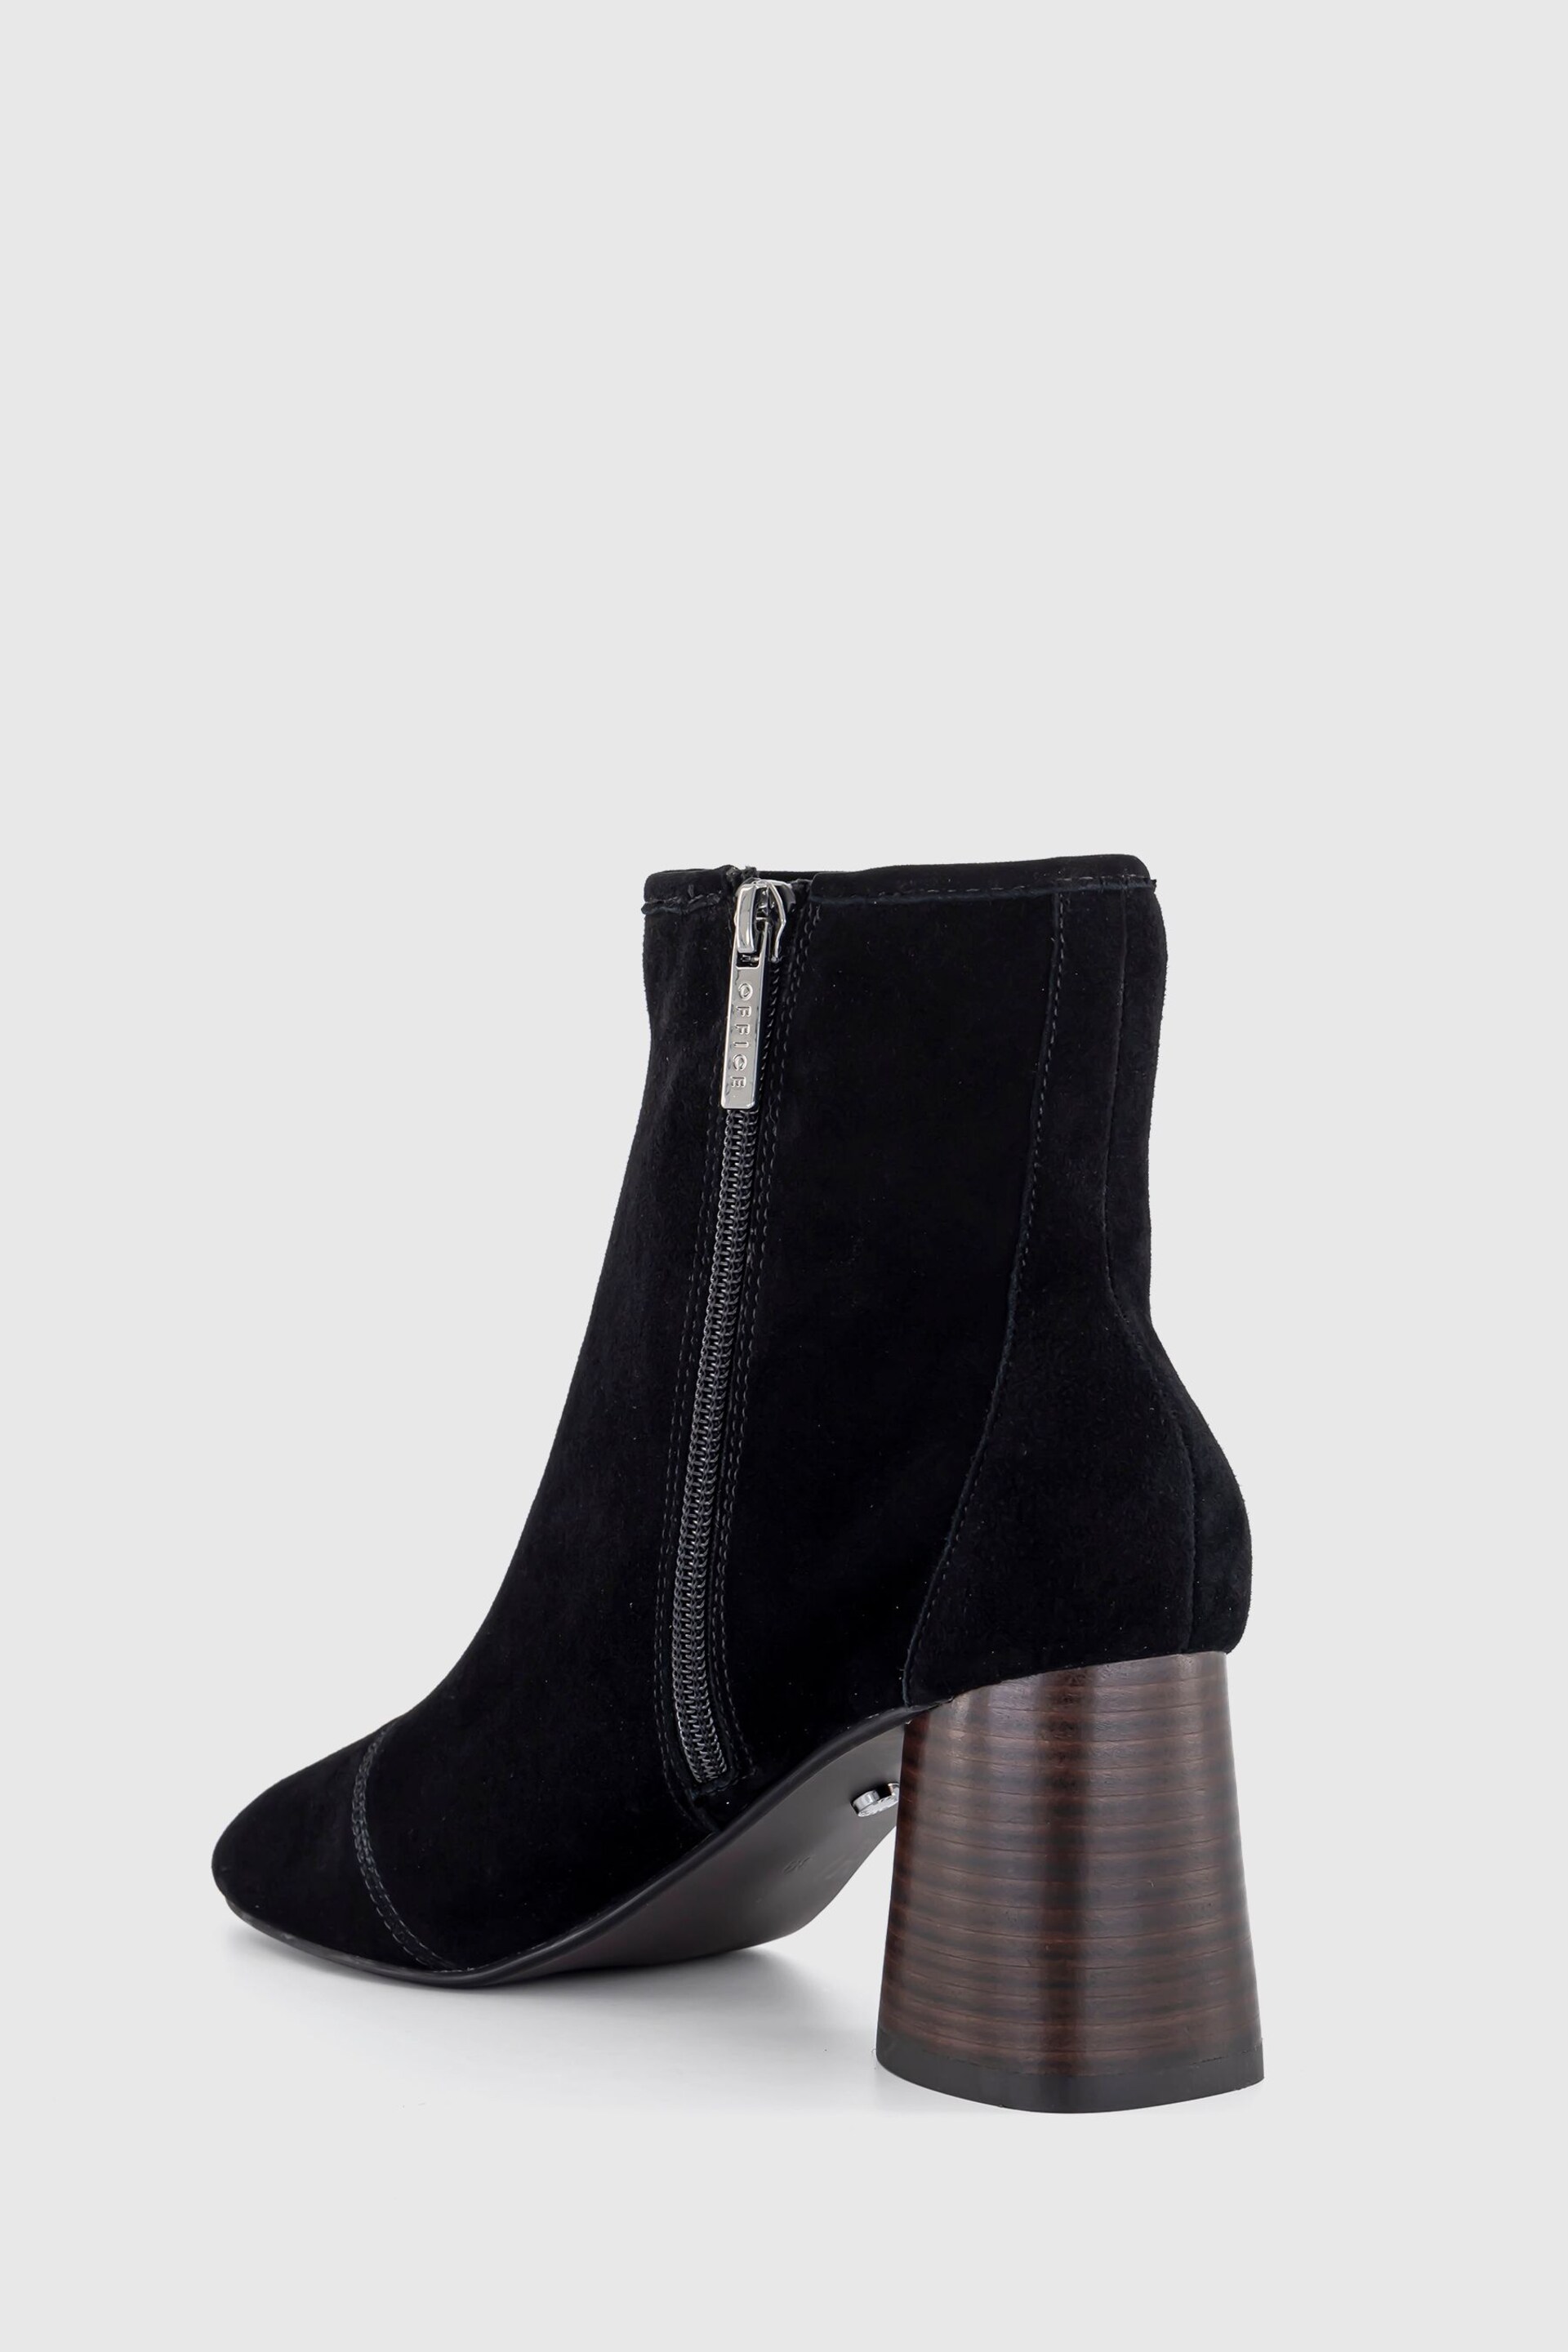 Office Black Suede Sock Ash Ankle Boots - Image 2 of 4